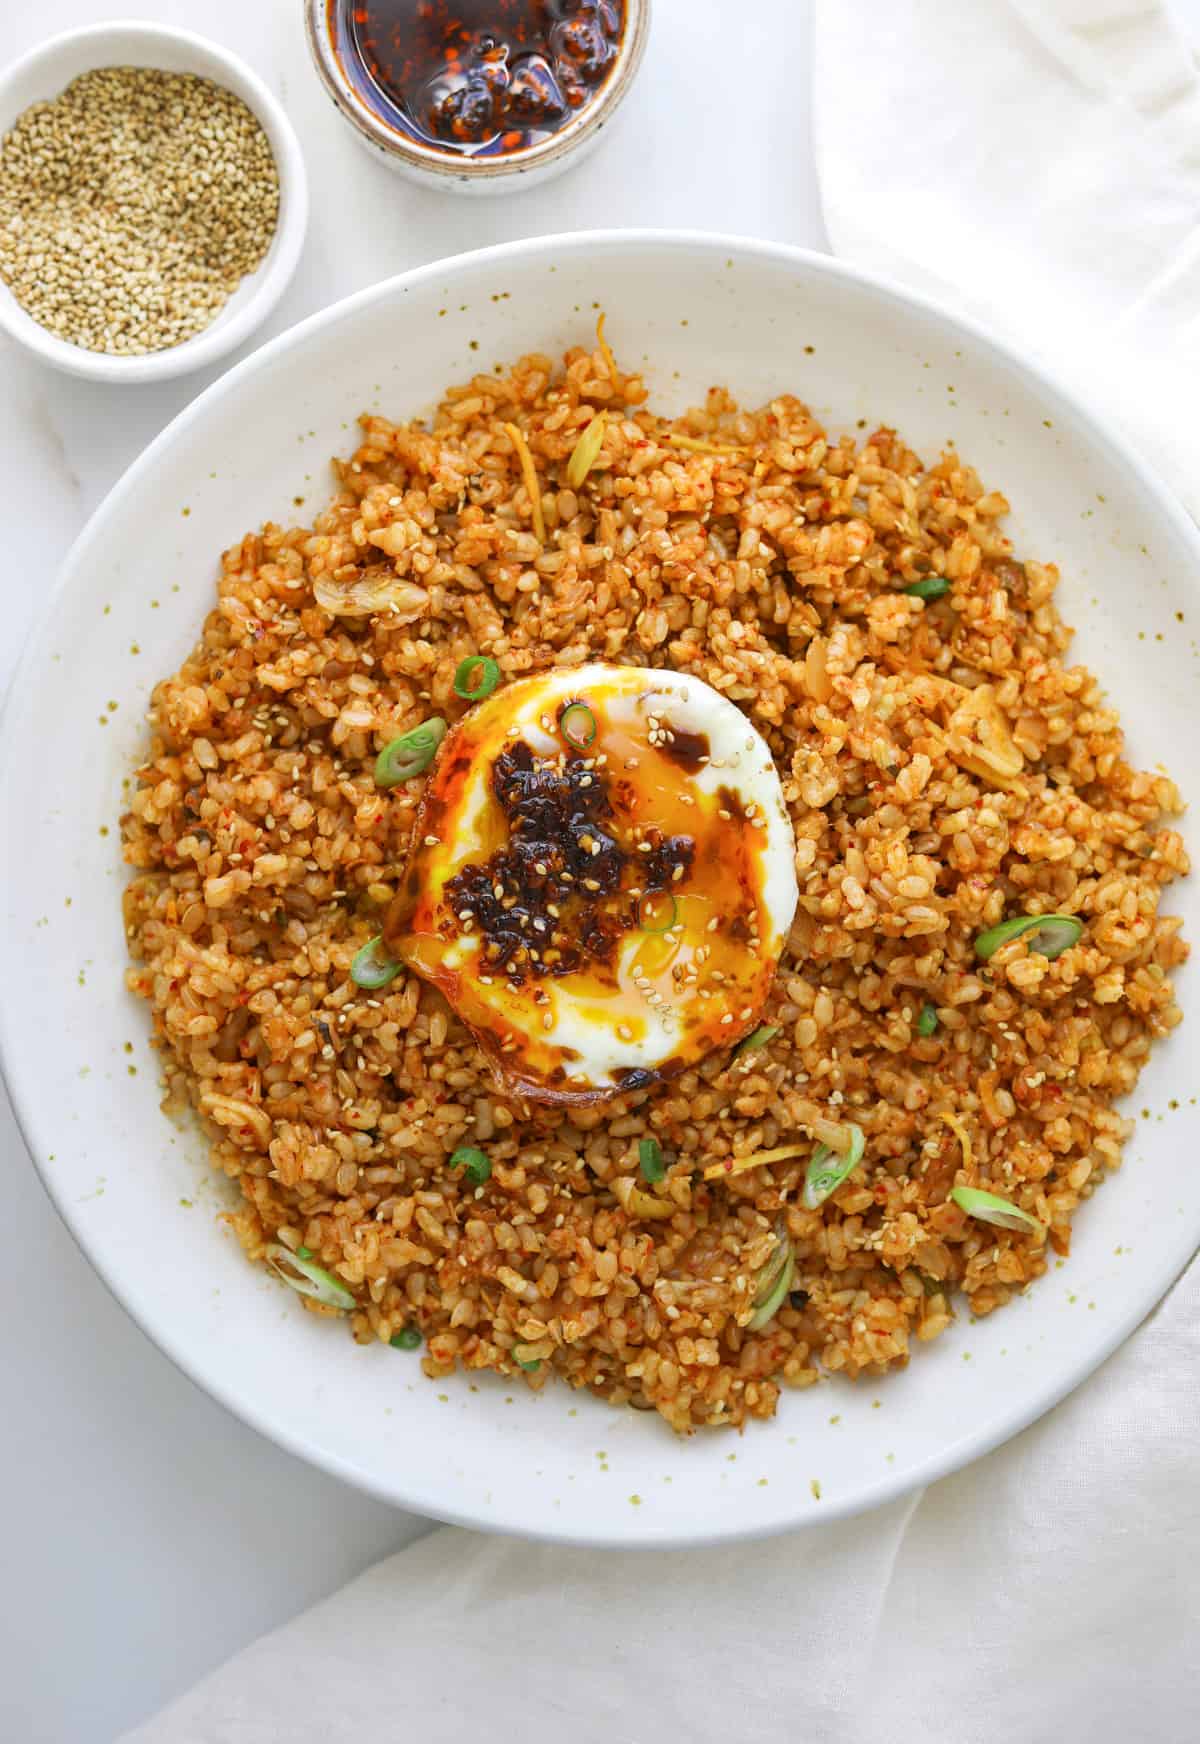 a bowl of kimchi fried rice topped with a runny egg, chili oil and thinly sliced green onions with a bowl of toasted sesame seeds on the side